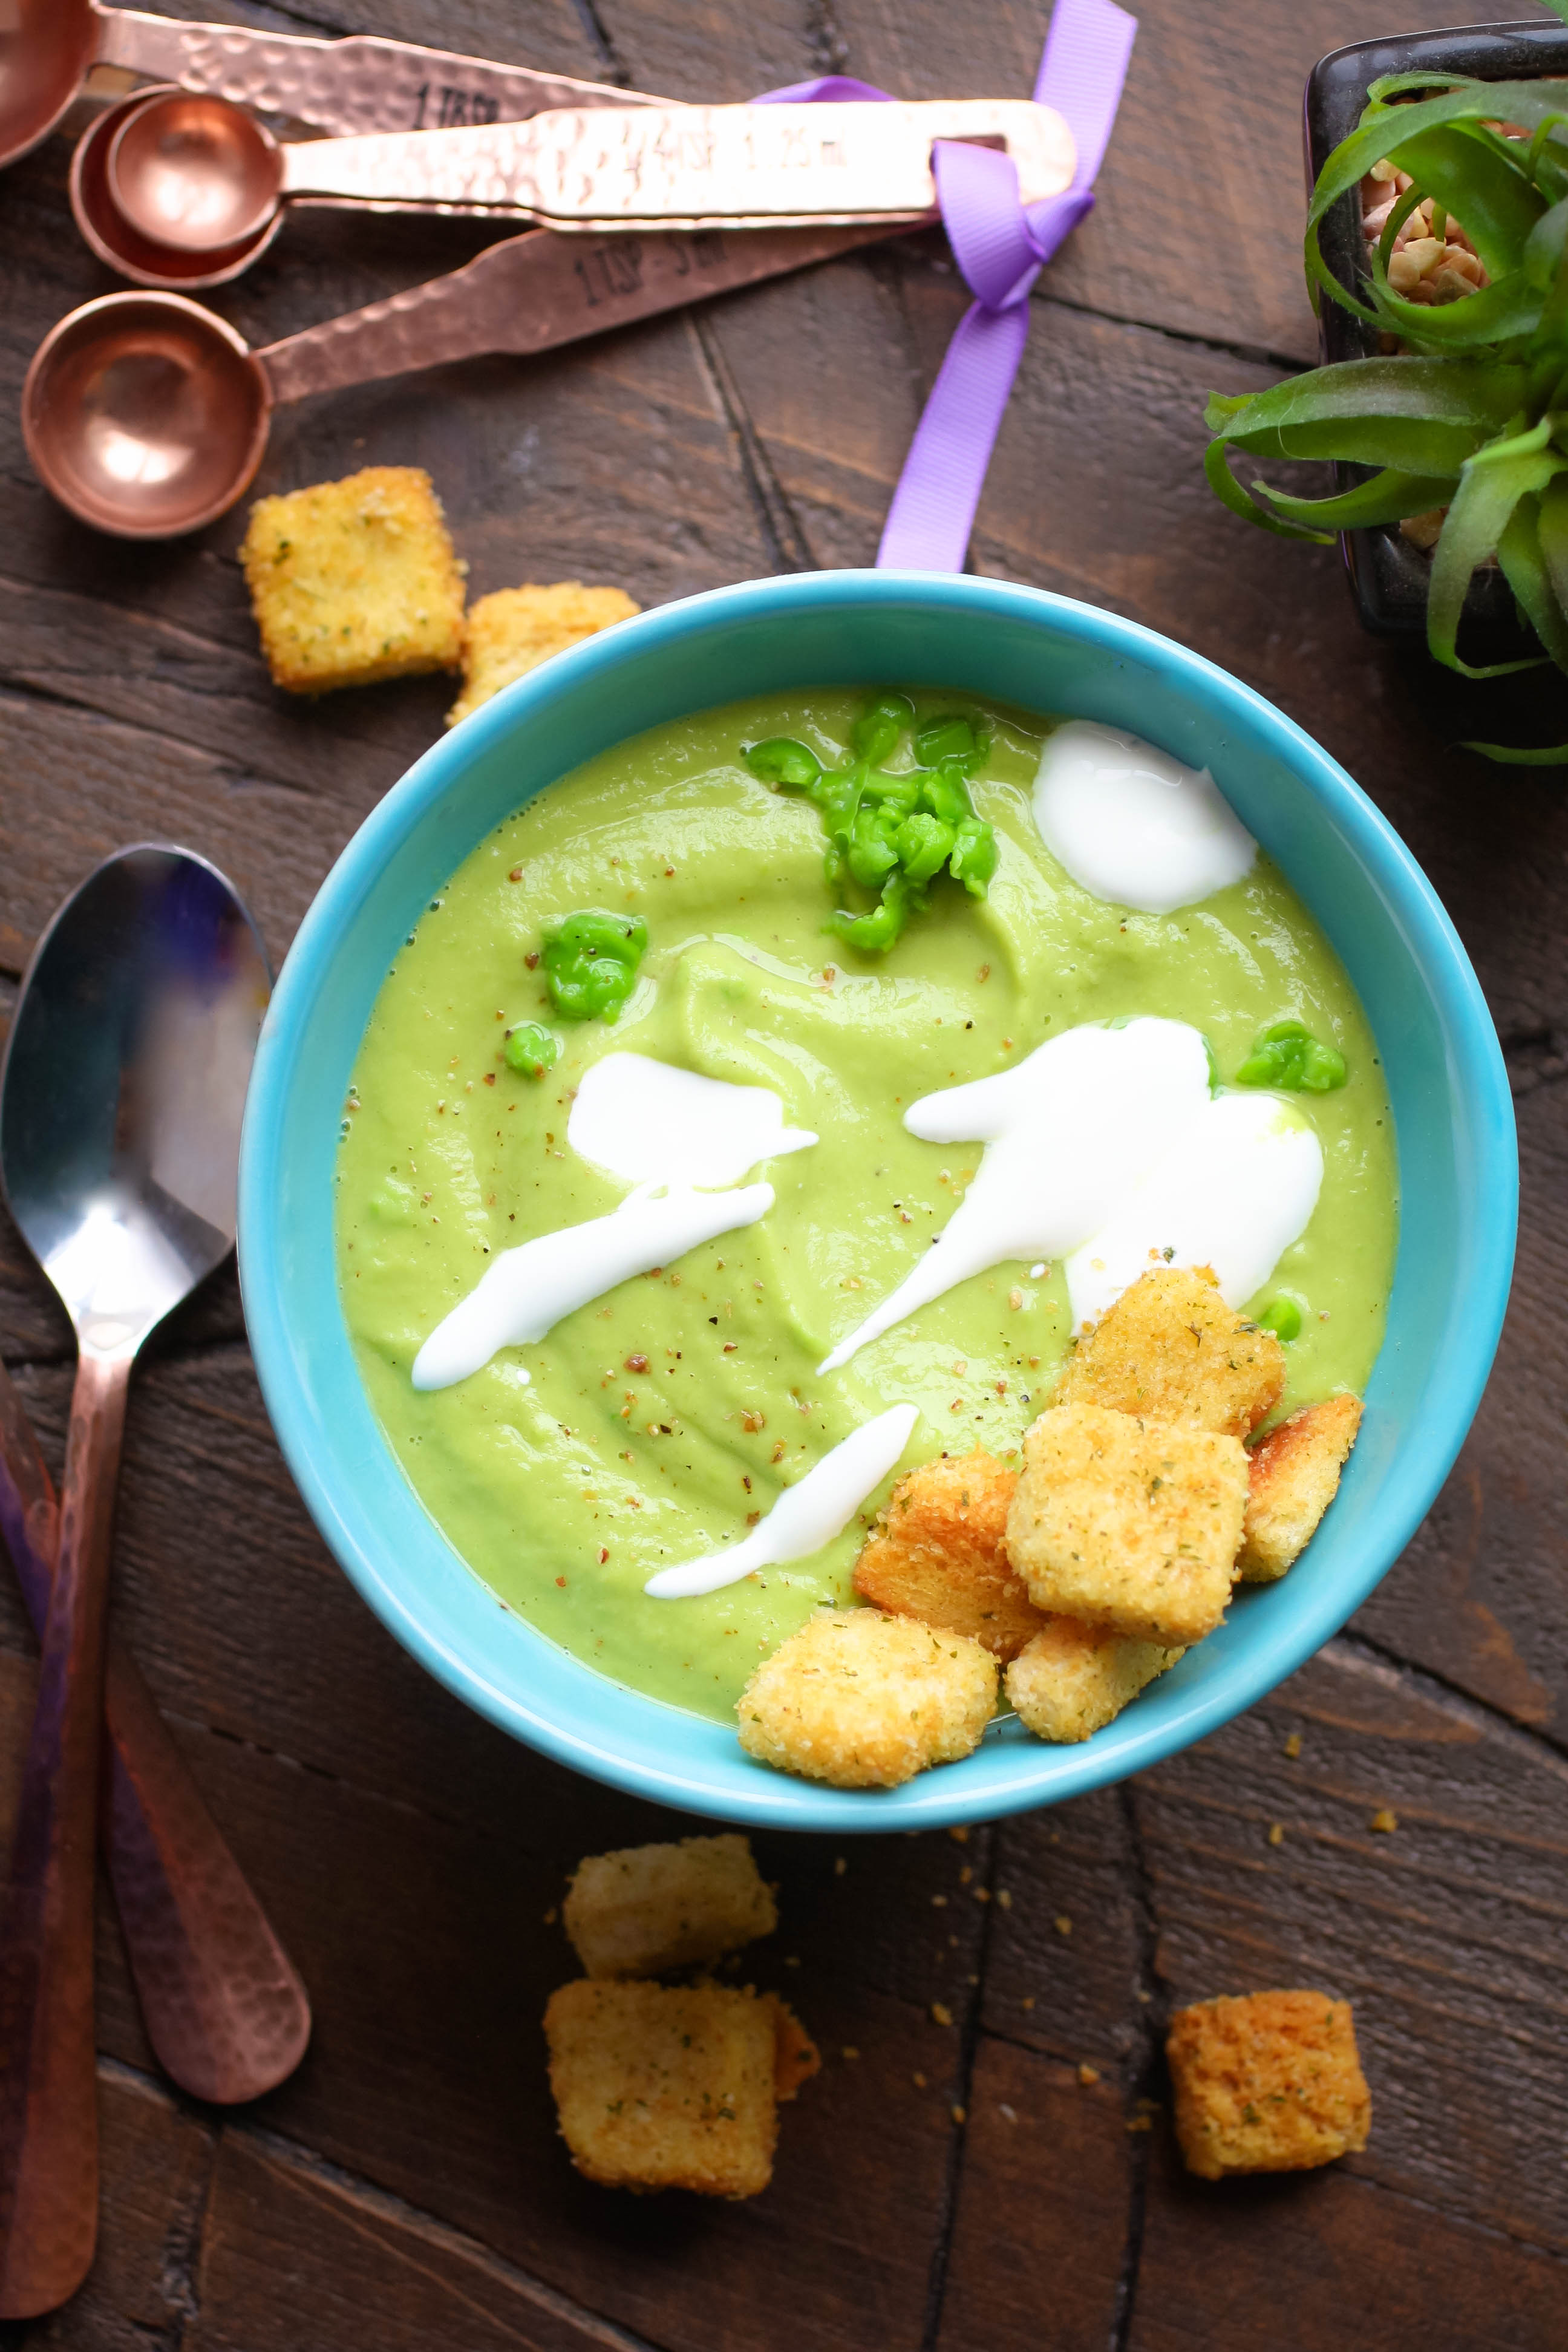 Warm Avocado and Pea Soup is like springtime in a bowl! You'll love Warm Avocado and Pea Soup for your next meal.